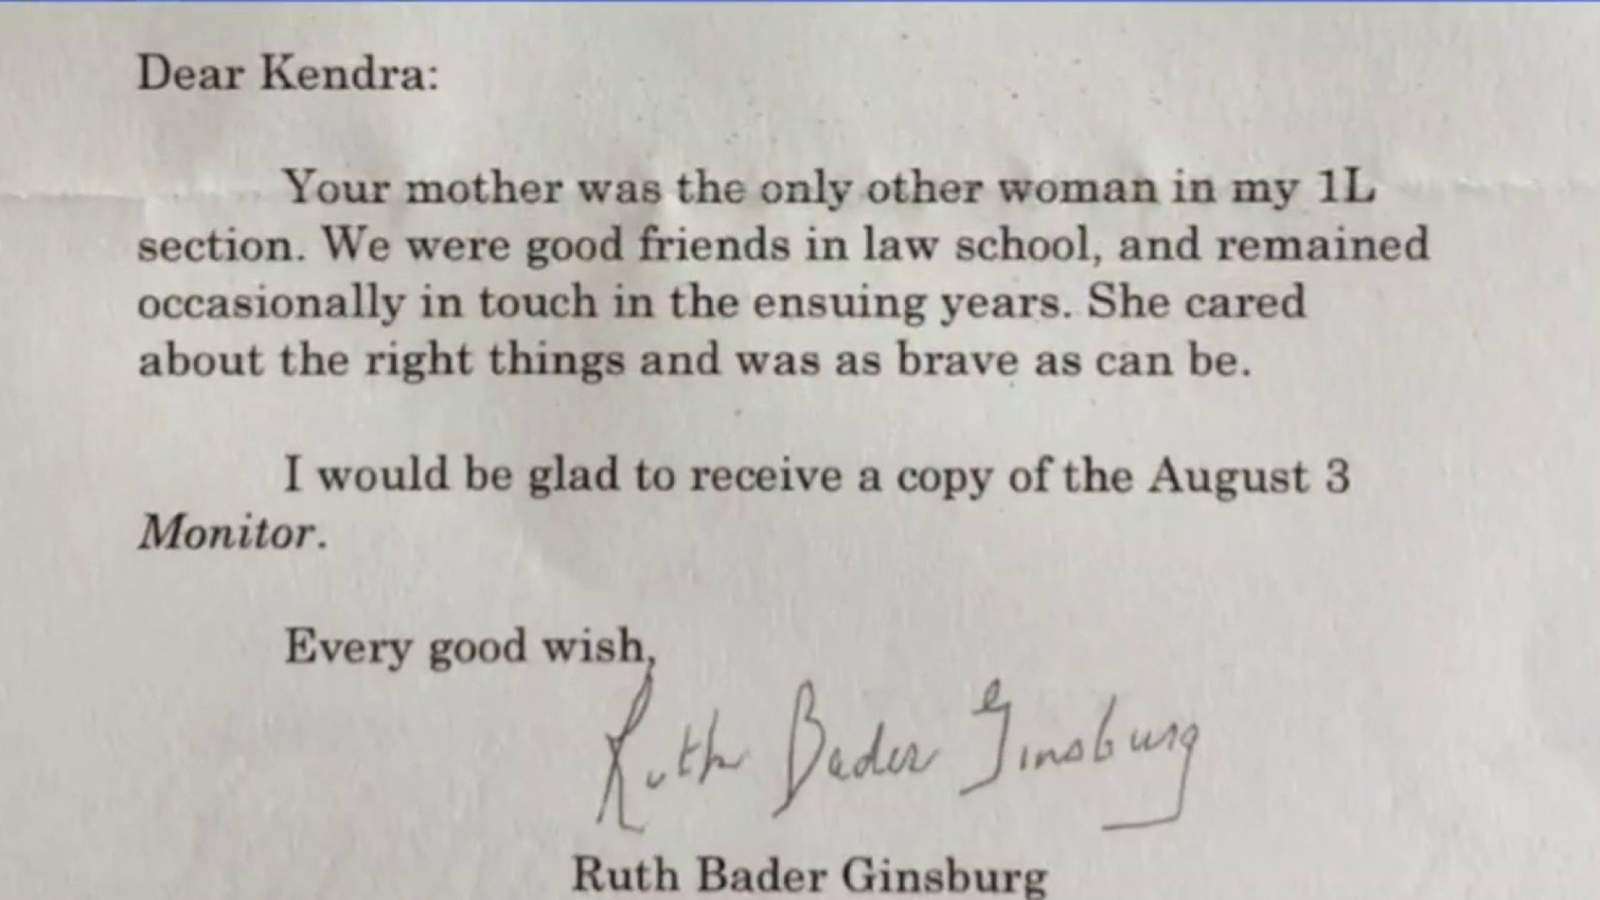 Daughter shares Grosse Pointe woman’s special connection to Ruth Bader Ginsburg